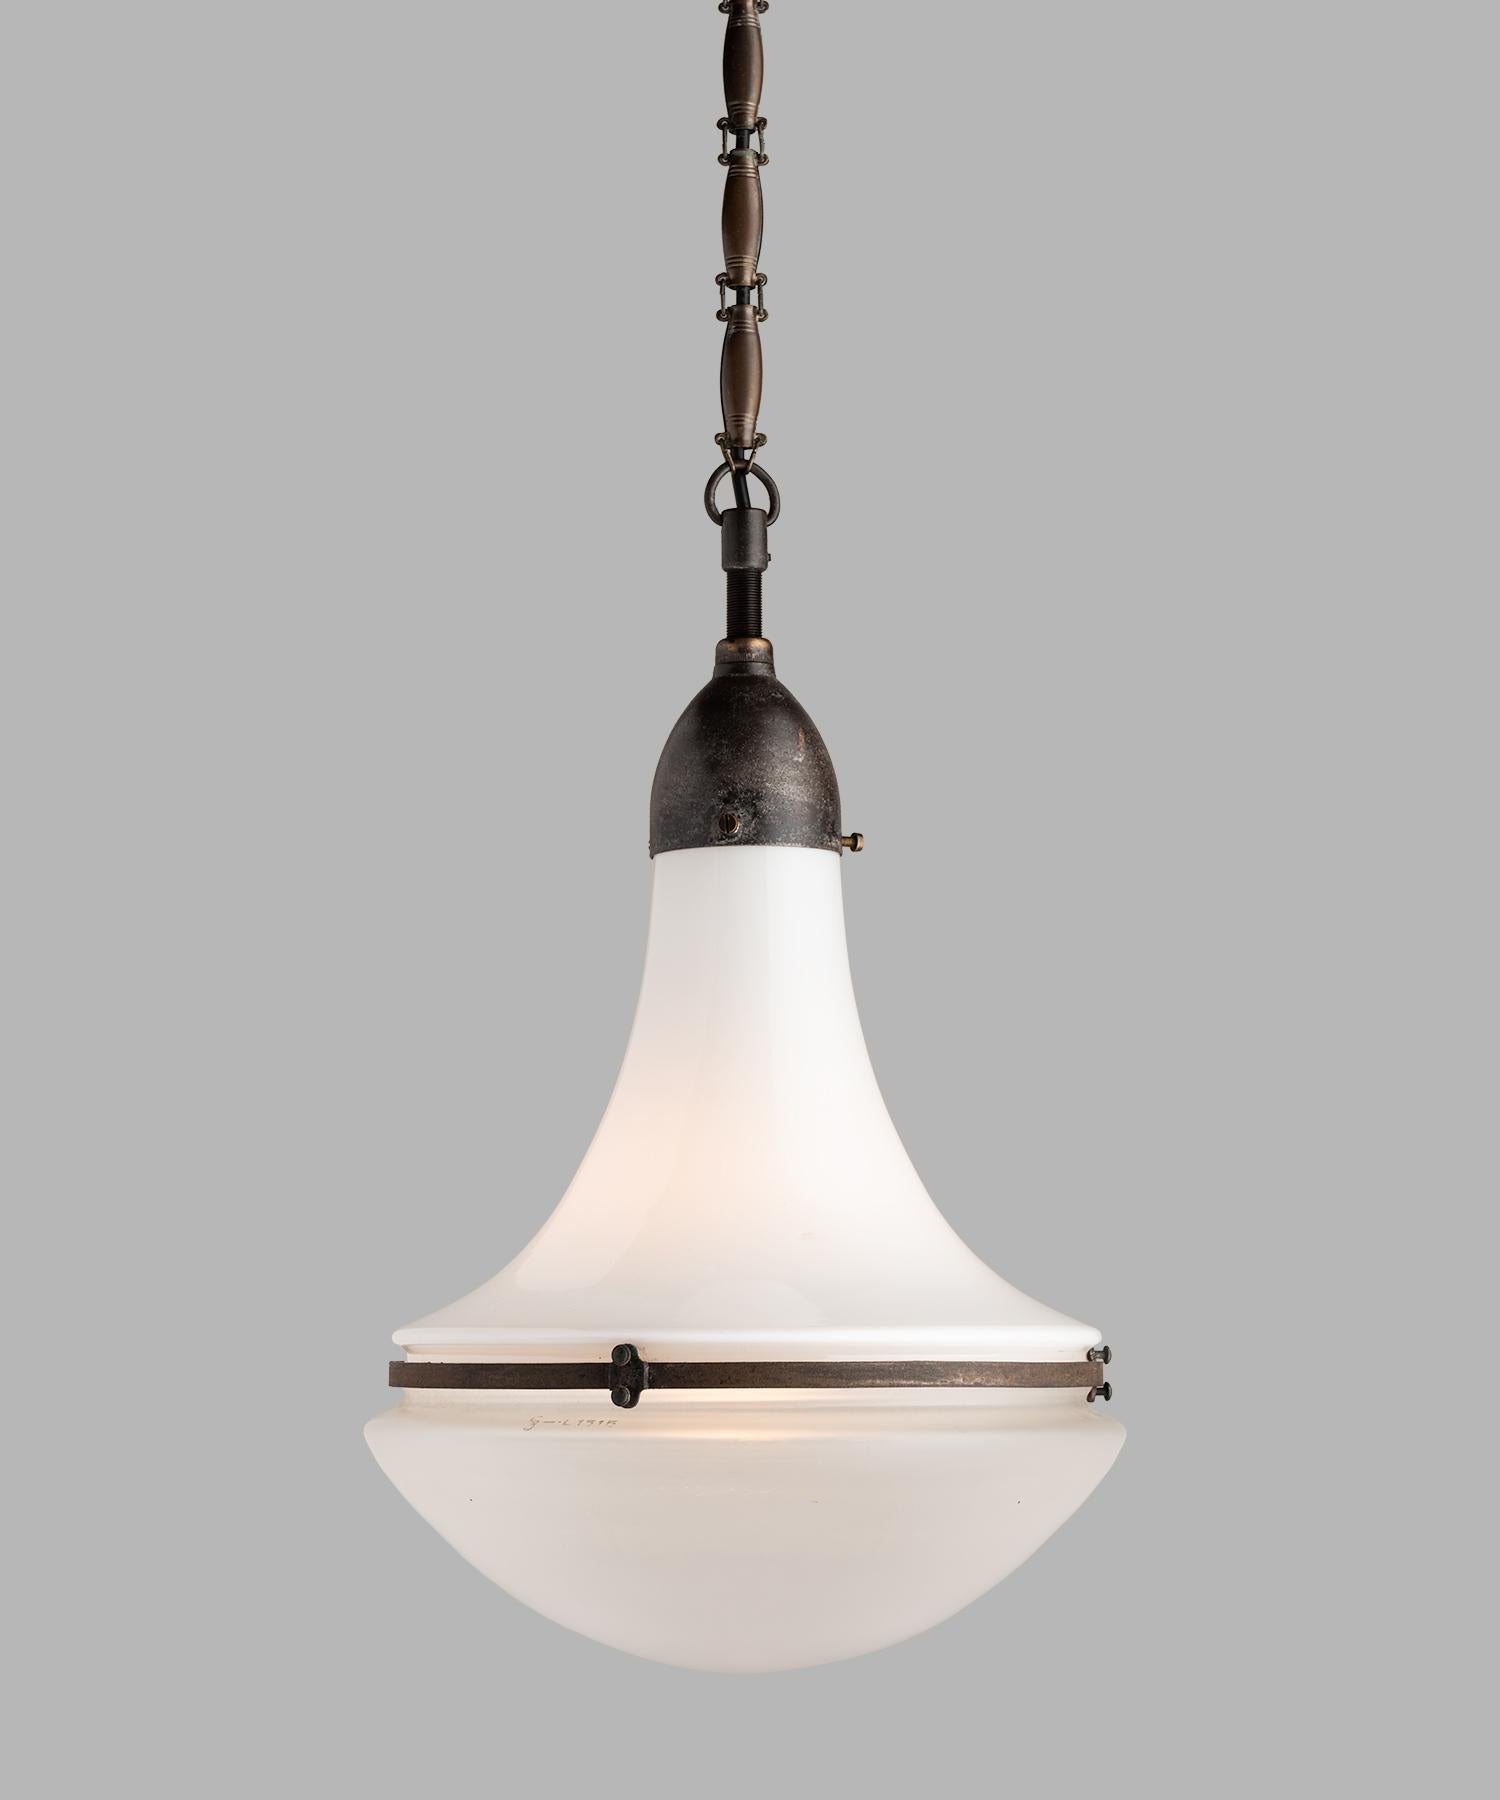 Peter Behrens Luzette pendant, Germany, circa 1920.

Custom order of (3) pendants with opaline glass top and frosted glass bottom, secured with patinated steel fitter and brace. Each light is unique with slight variance in patina and condition.